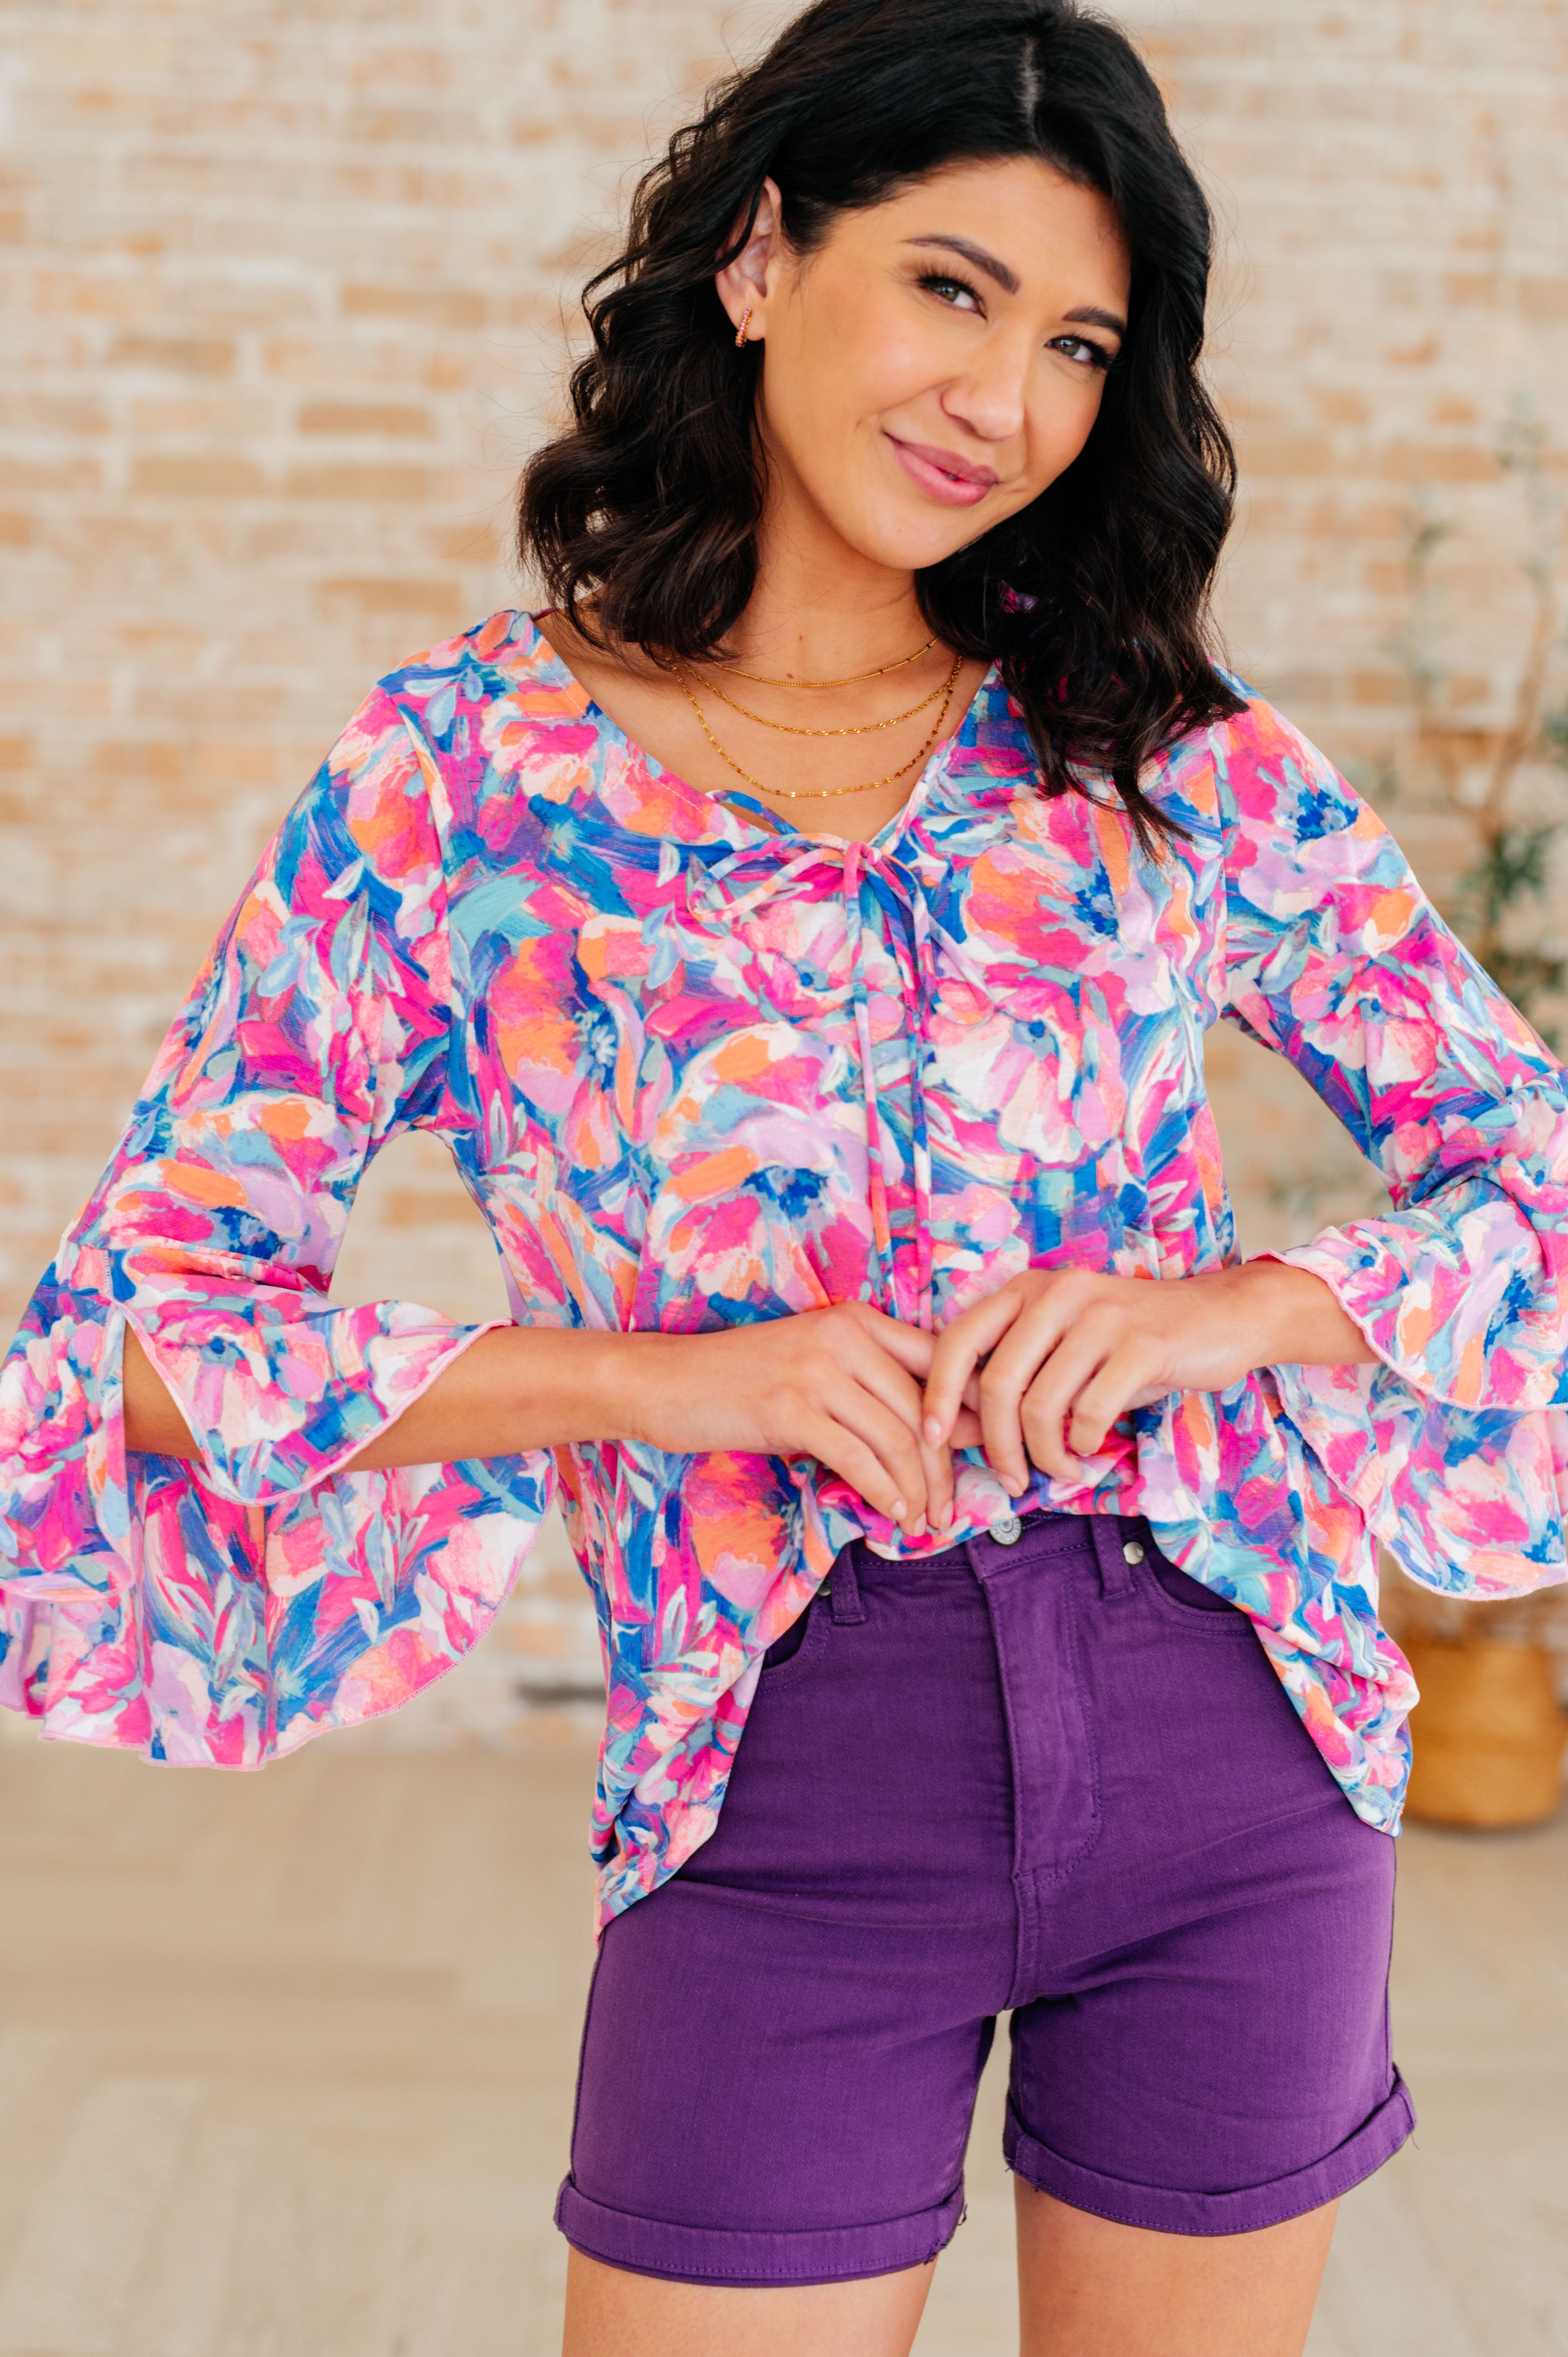 Willow Bell Sleeve Top in Royal Brushed Floral-Tops-Ave Shops-Urban Threadz Boutique, Women's Fashion Boutique in Saugatuck, MI